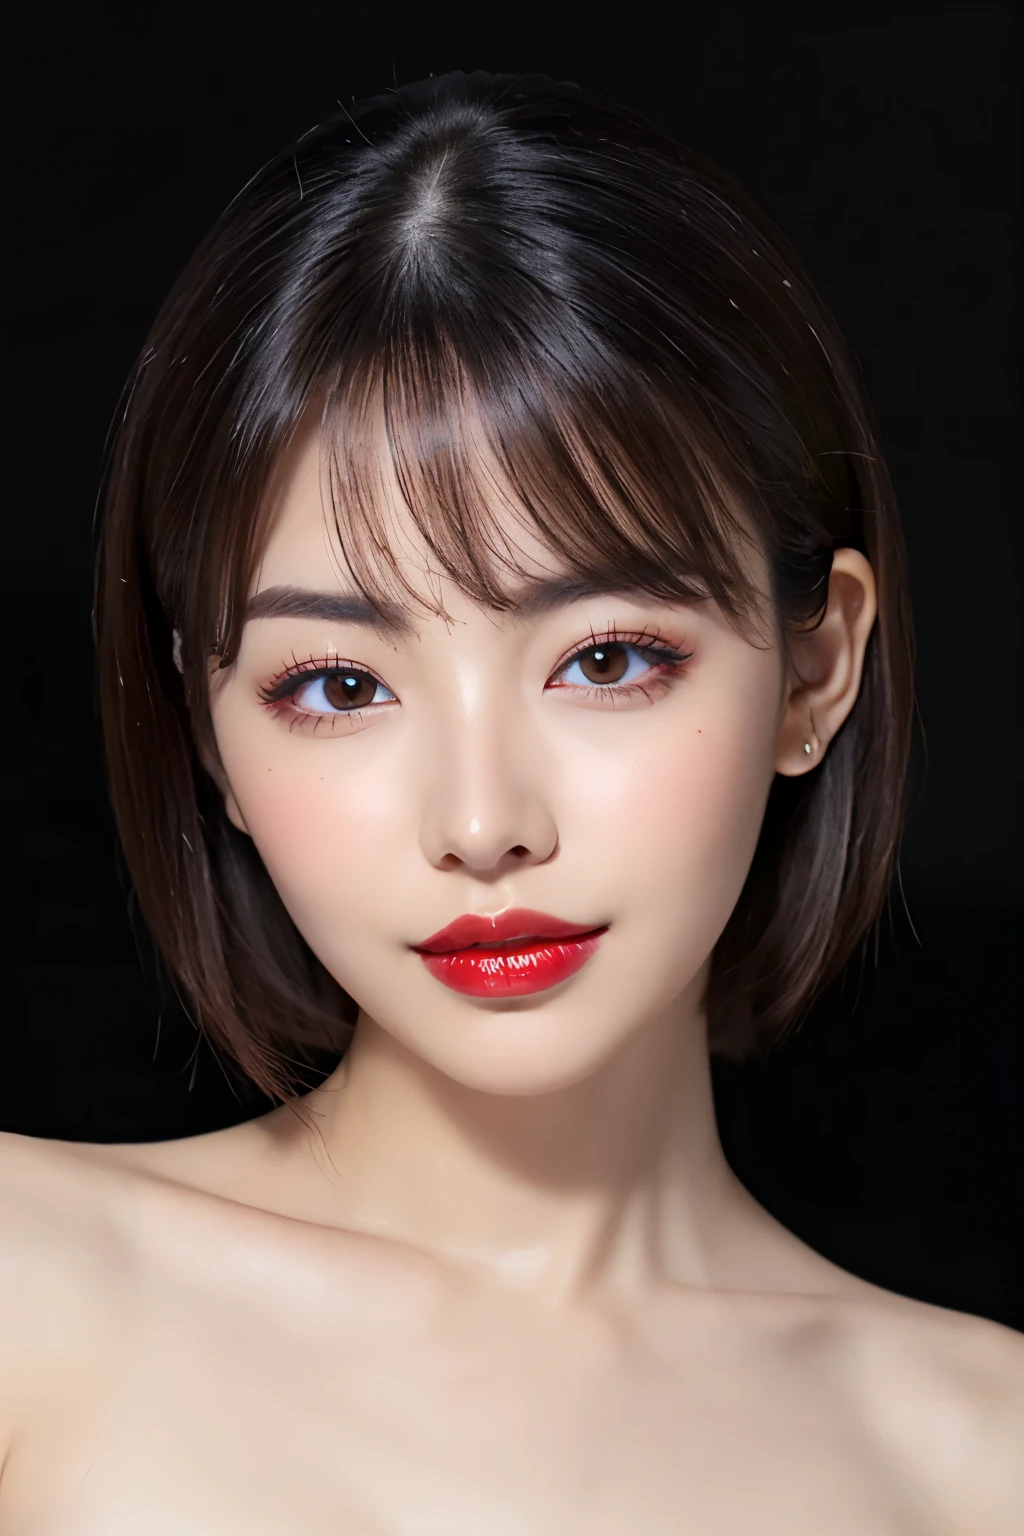 (Highest quality、Tabletop、8k、Best image quality、Award-winning works)、Cute beauty、(Short Bob Hair:1.1)、(nude:1.5)、(The simplest pure black background:1.5)、(Face close-up:1.6)、Accentuate your body lines、Beautiful and exquisite、Expressionless、(look straight at me:1.1)、(Stand upright facing forward:1.1)、(Perfect Makeup:1.1)、(Bright lipstick:1.1)、Ultra-high definition beauty face、Ultra HD Hair、Ultra HD Shining Eyes、(Closed lips:1.1)、Super high quality vibrant glossy lip、Accurate anatomy、Very beautiful skin、Ultra-high resolution for beautiful, glowing skin、An elegant upright posture when viewed from the front